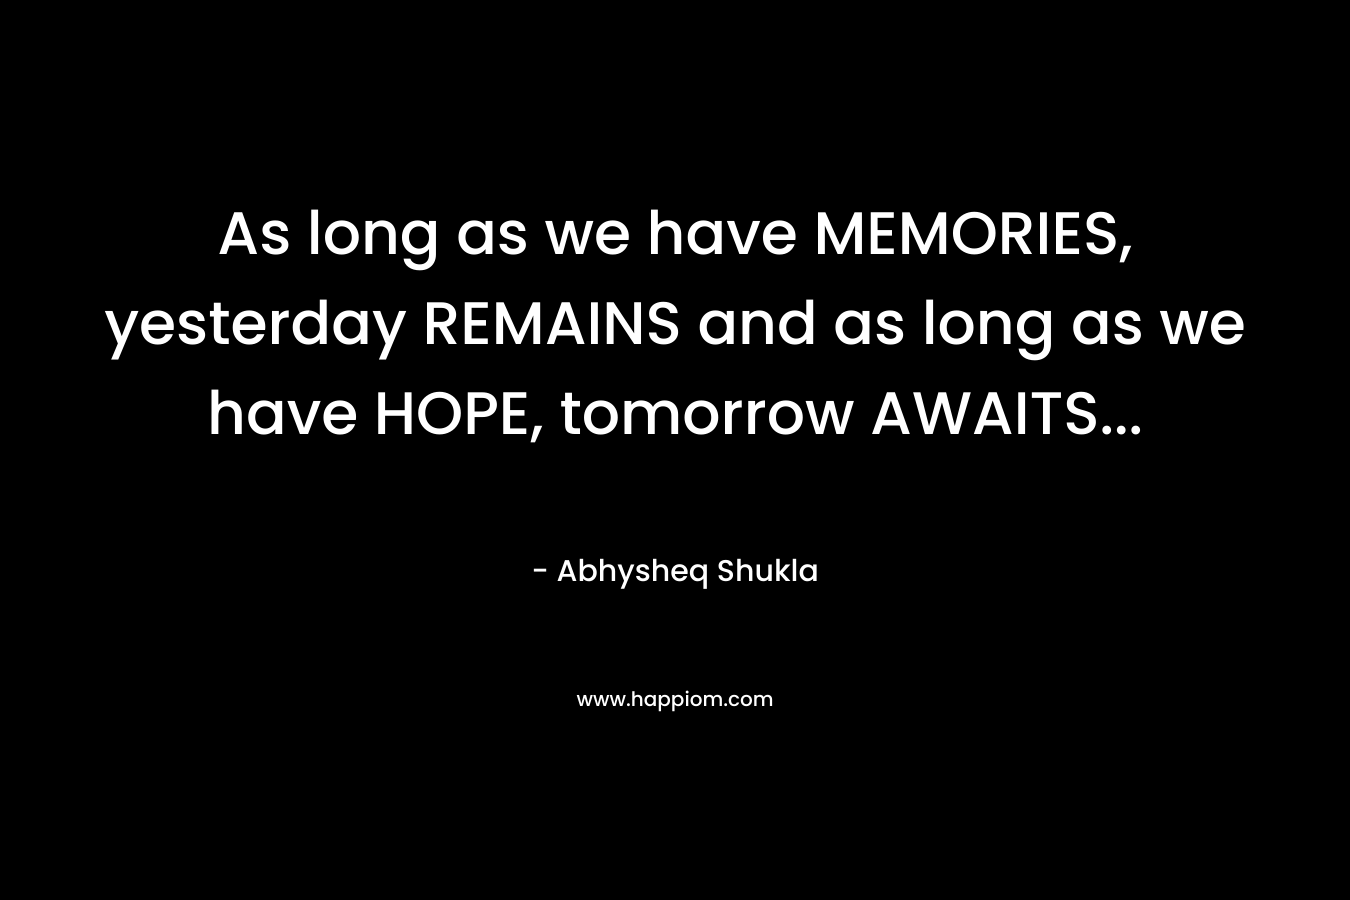 As long as we have MEMORIES, yesterday REMAINS and as long as we have HOPE, tomorrow AWAITS...